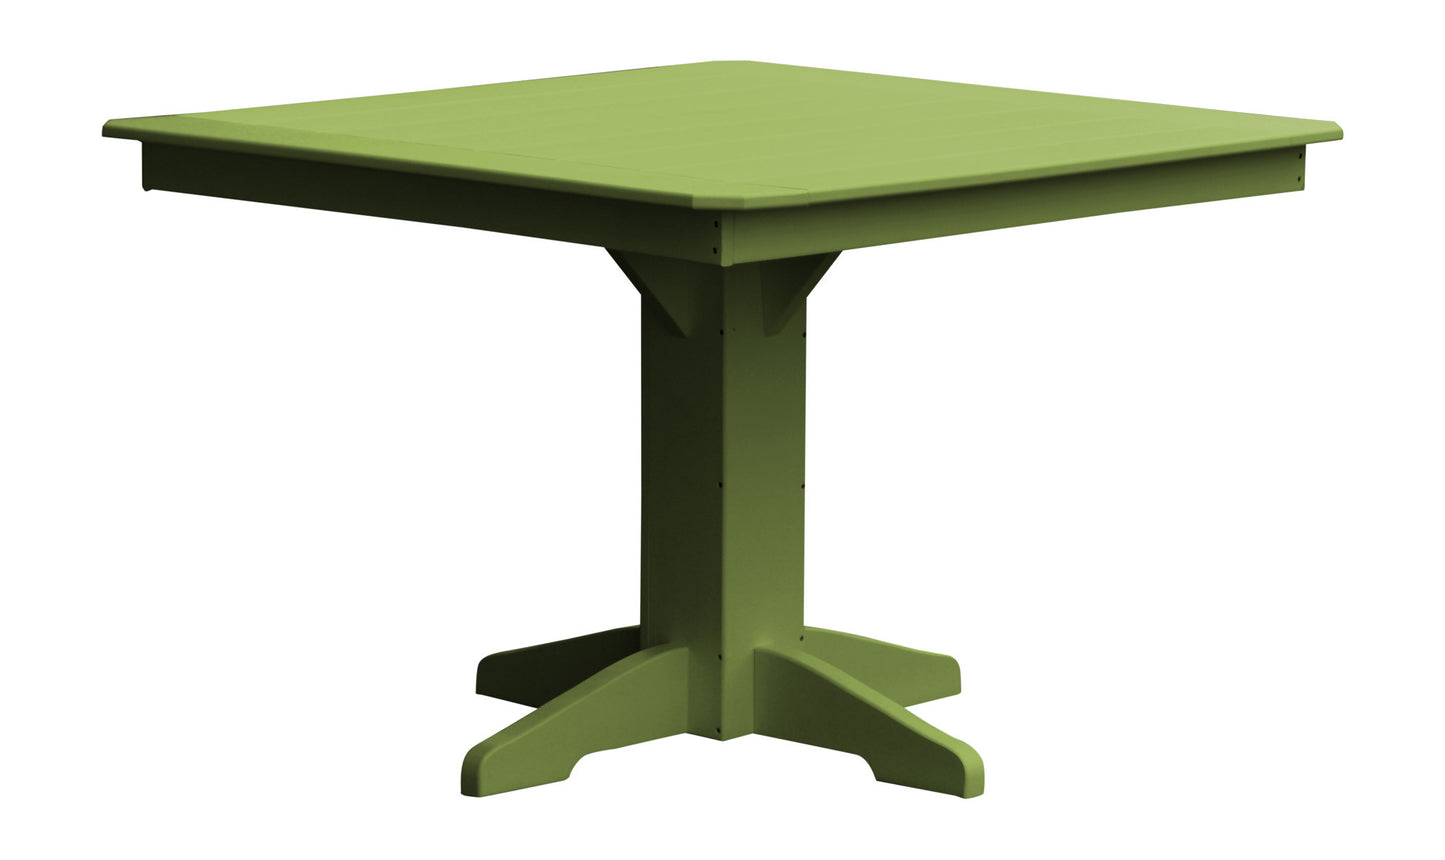 A&L Furniture Recycled Plastic 44" Square Dining Table - Tropical Lime